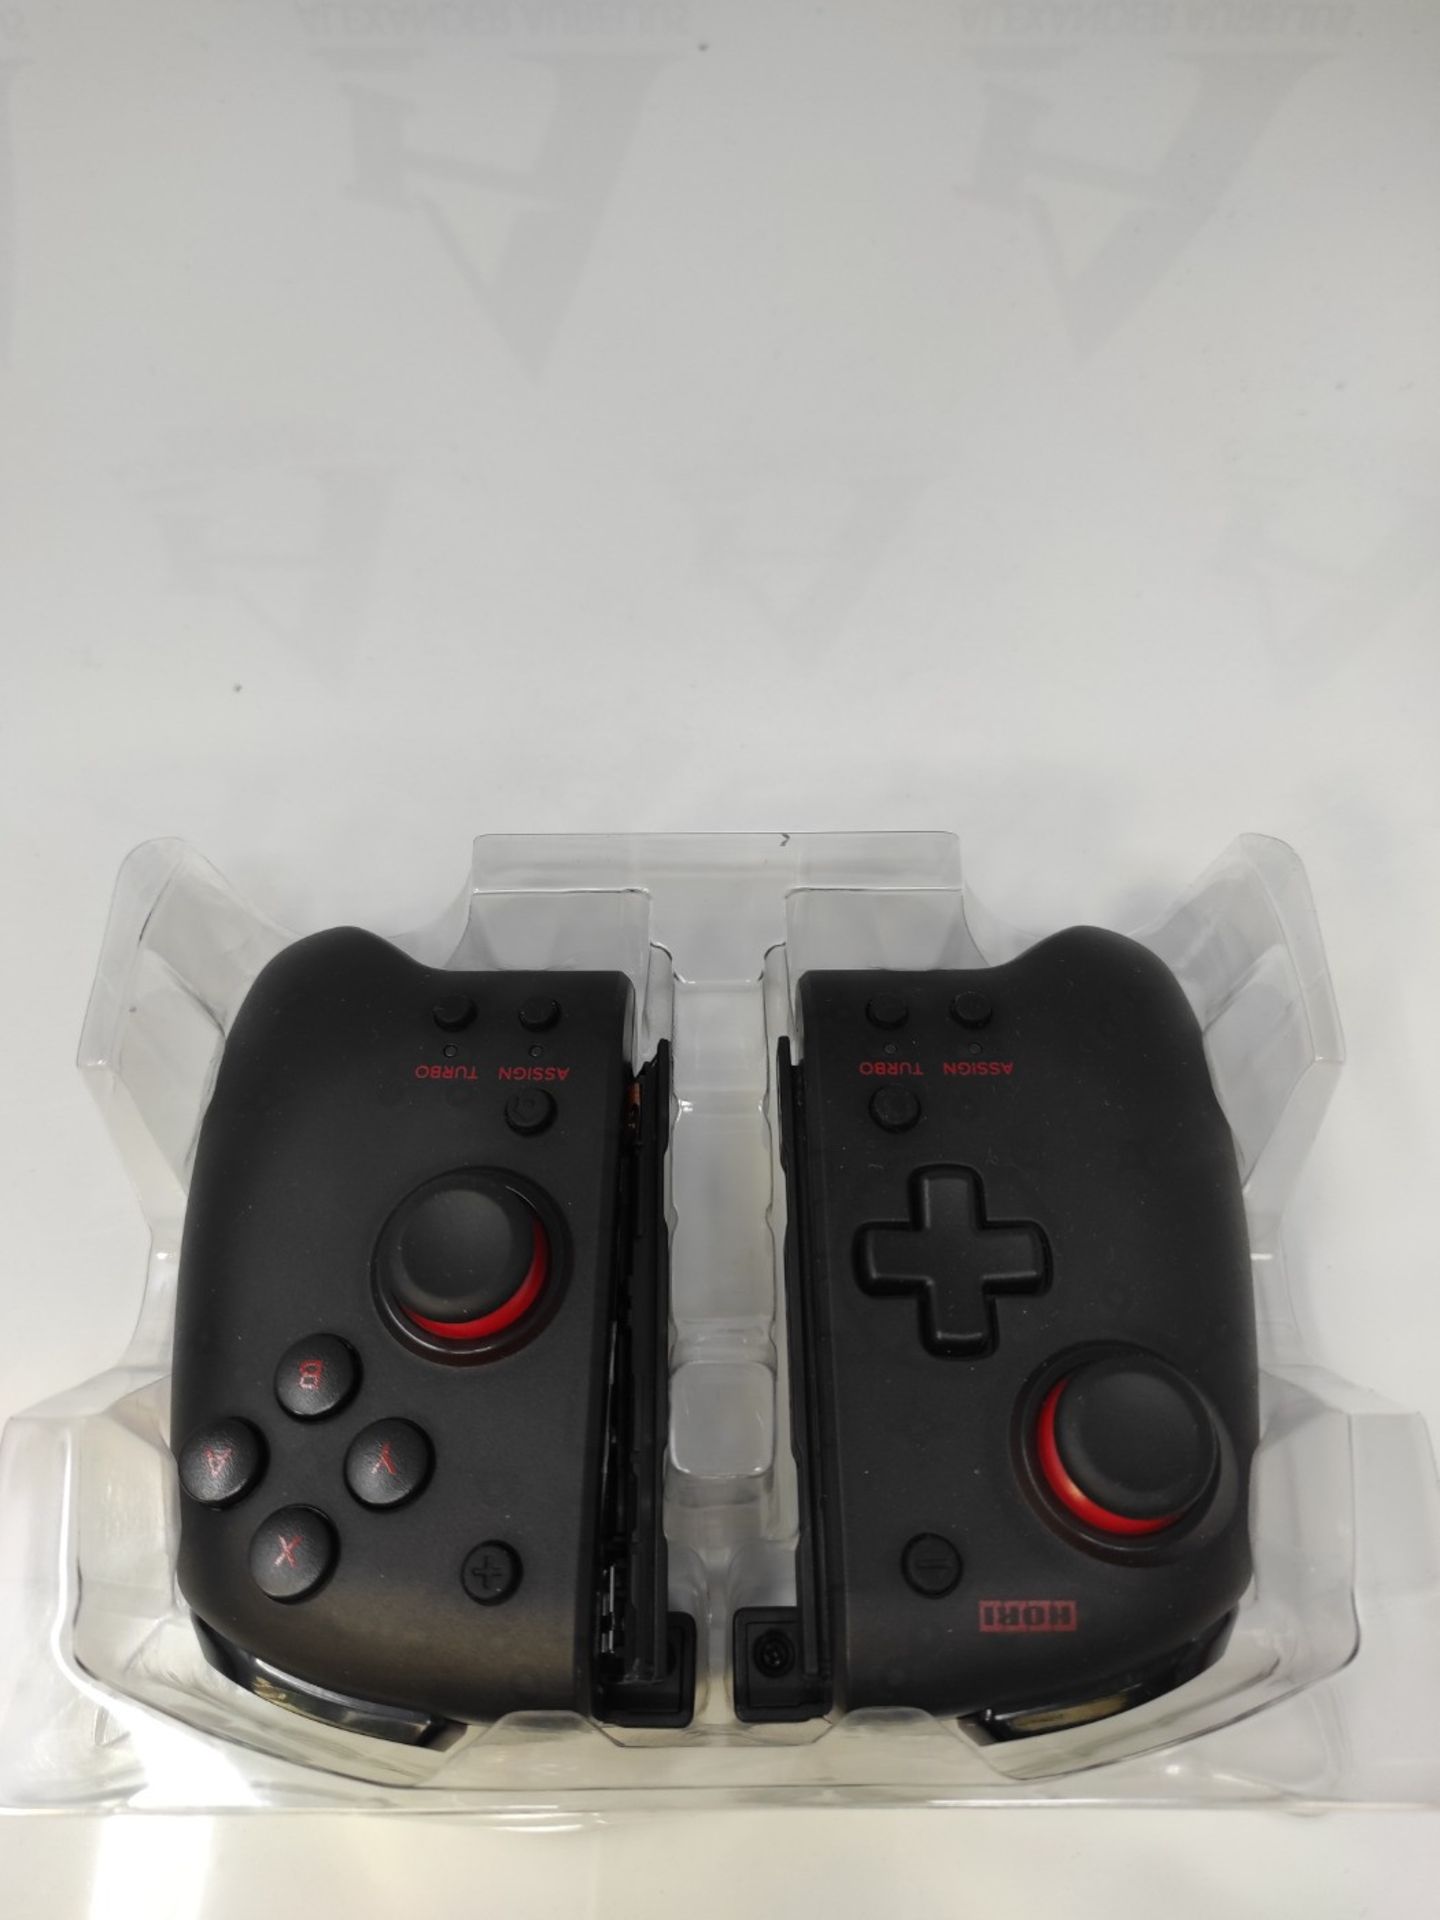 HORI Split Pad Pro (Black) Handheld Controller for Nintendo Switch - Officially Licens - Image 3 of 3